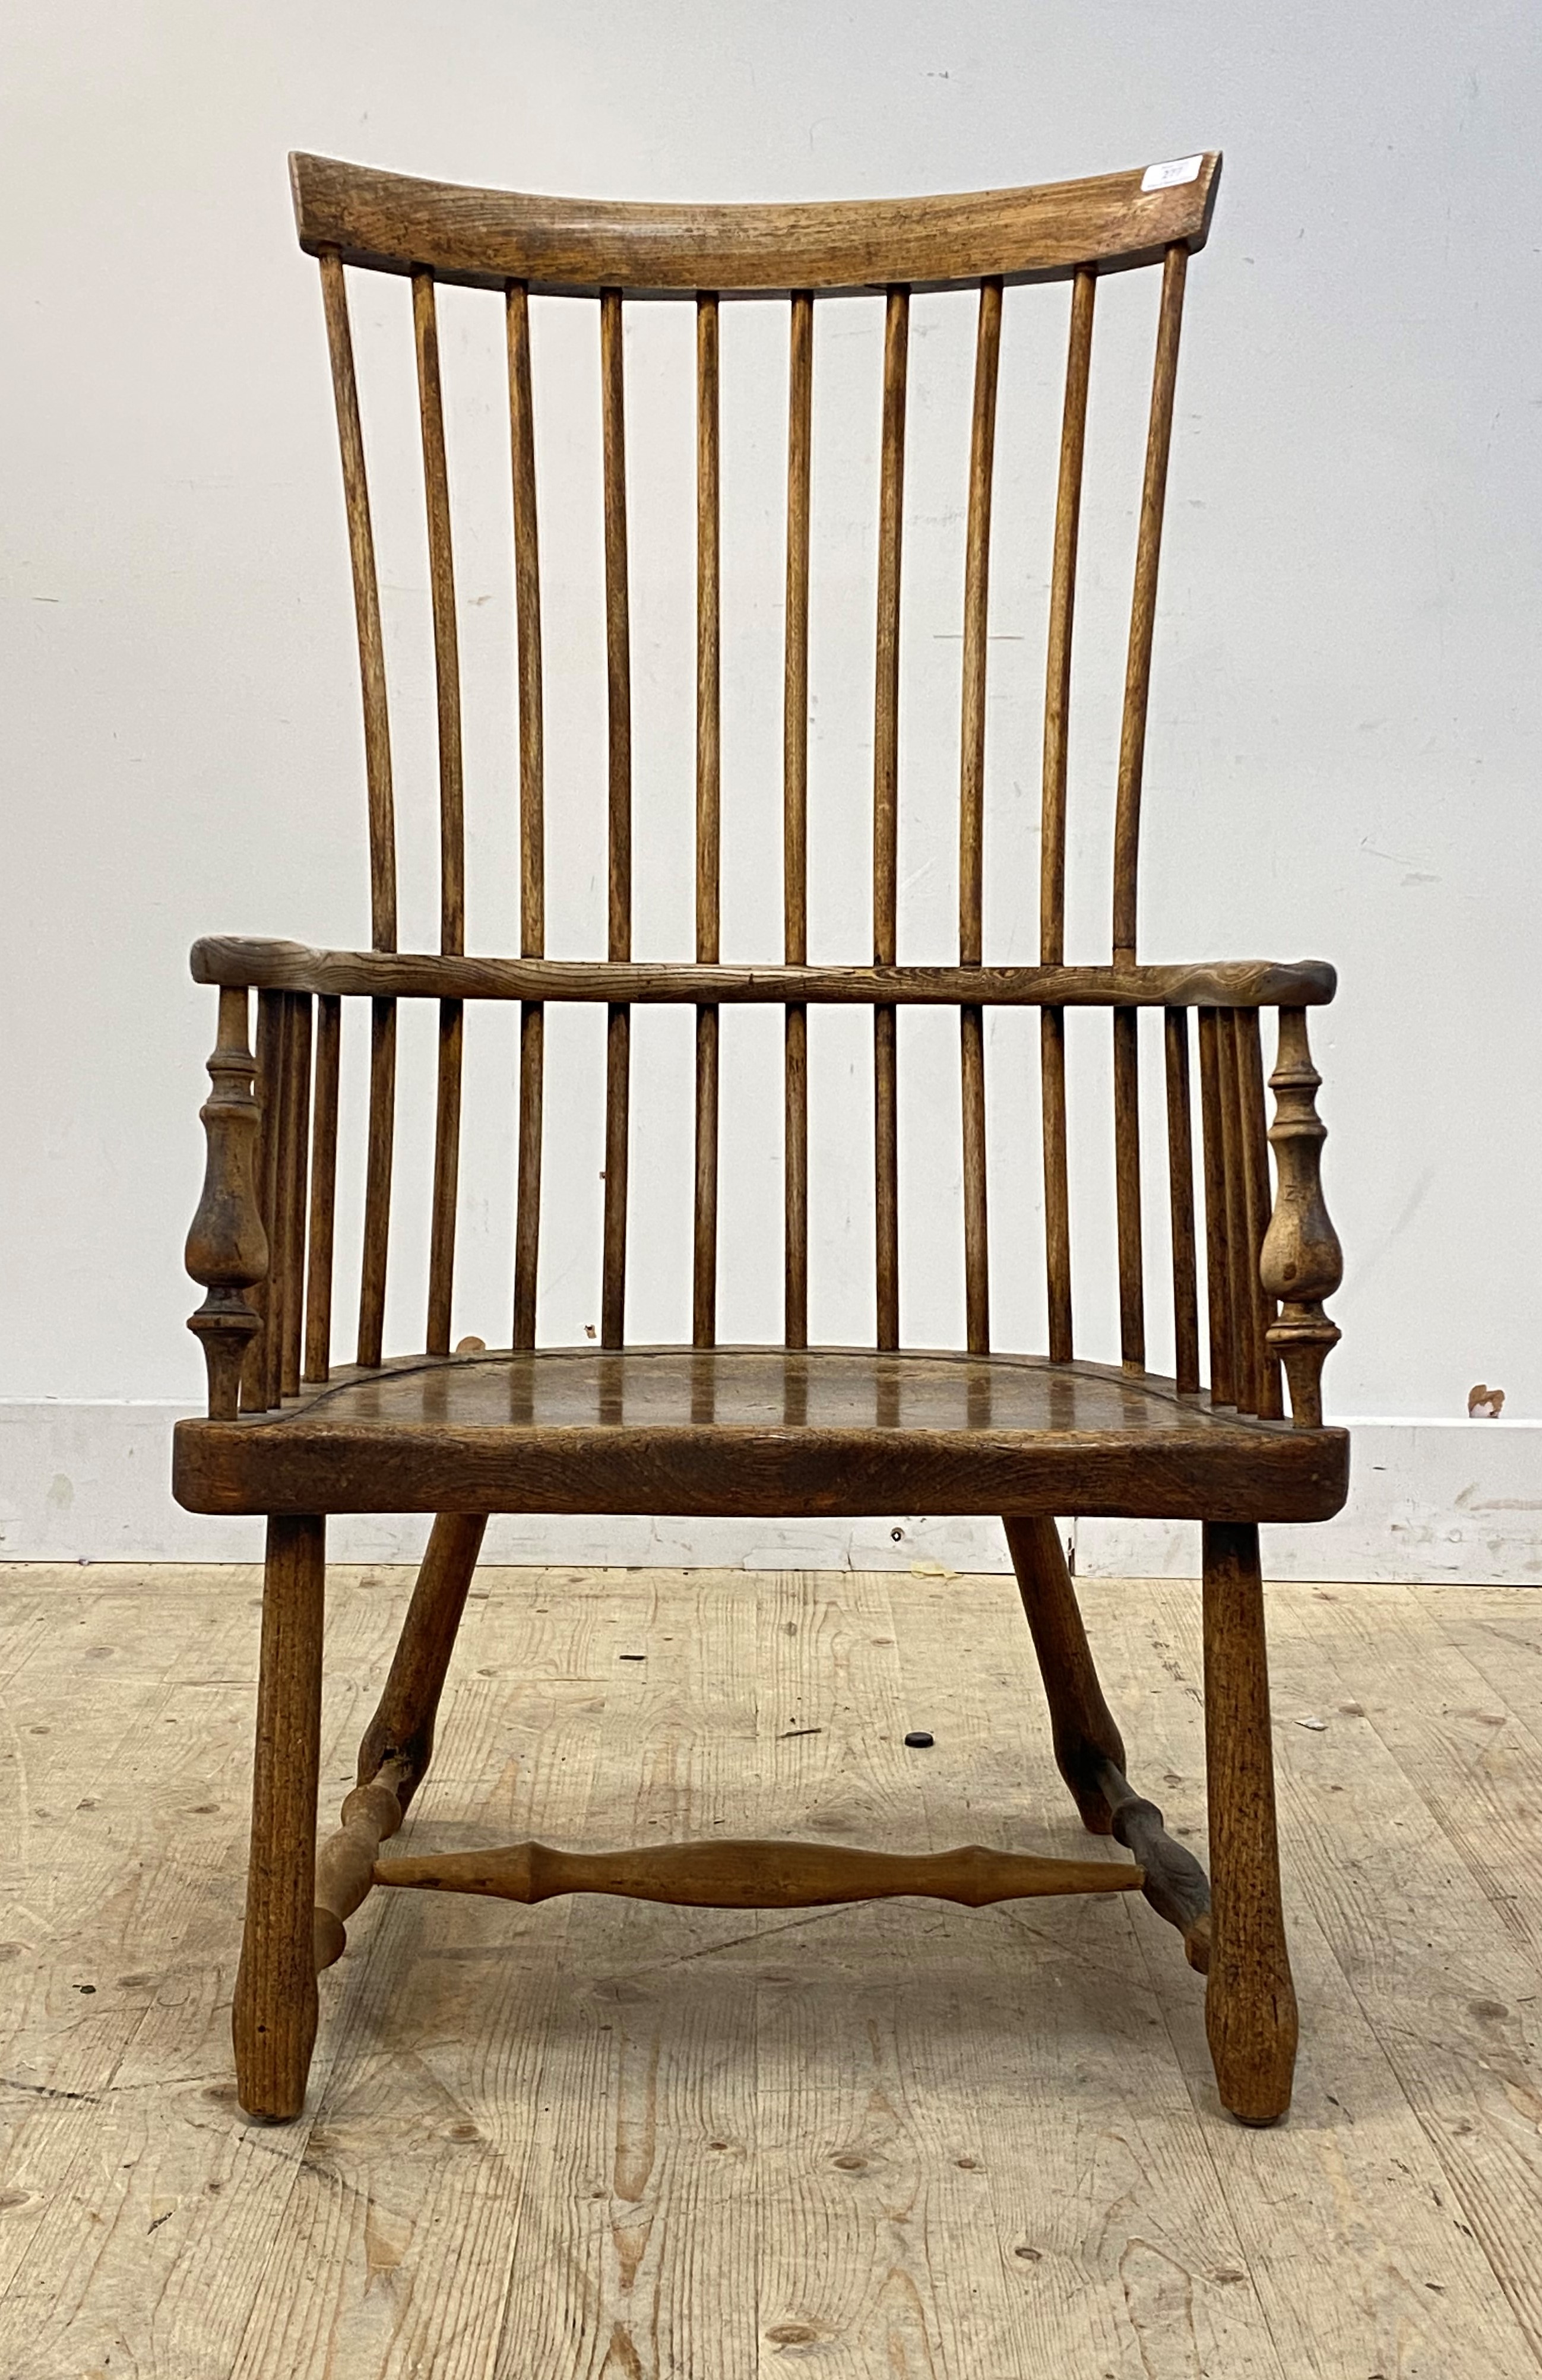 A vernacular early 19th century ash and elm Windsor comb back chair, the bowed armrest with scrolled